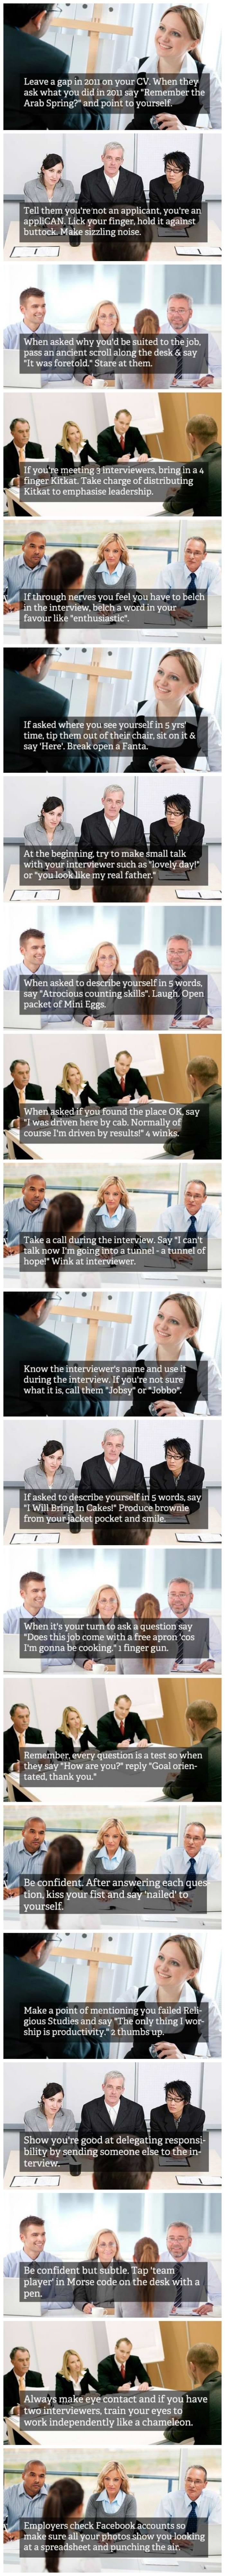 job interview pro tips funny picture